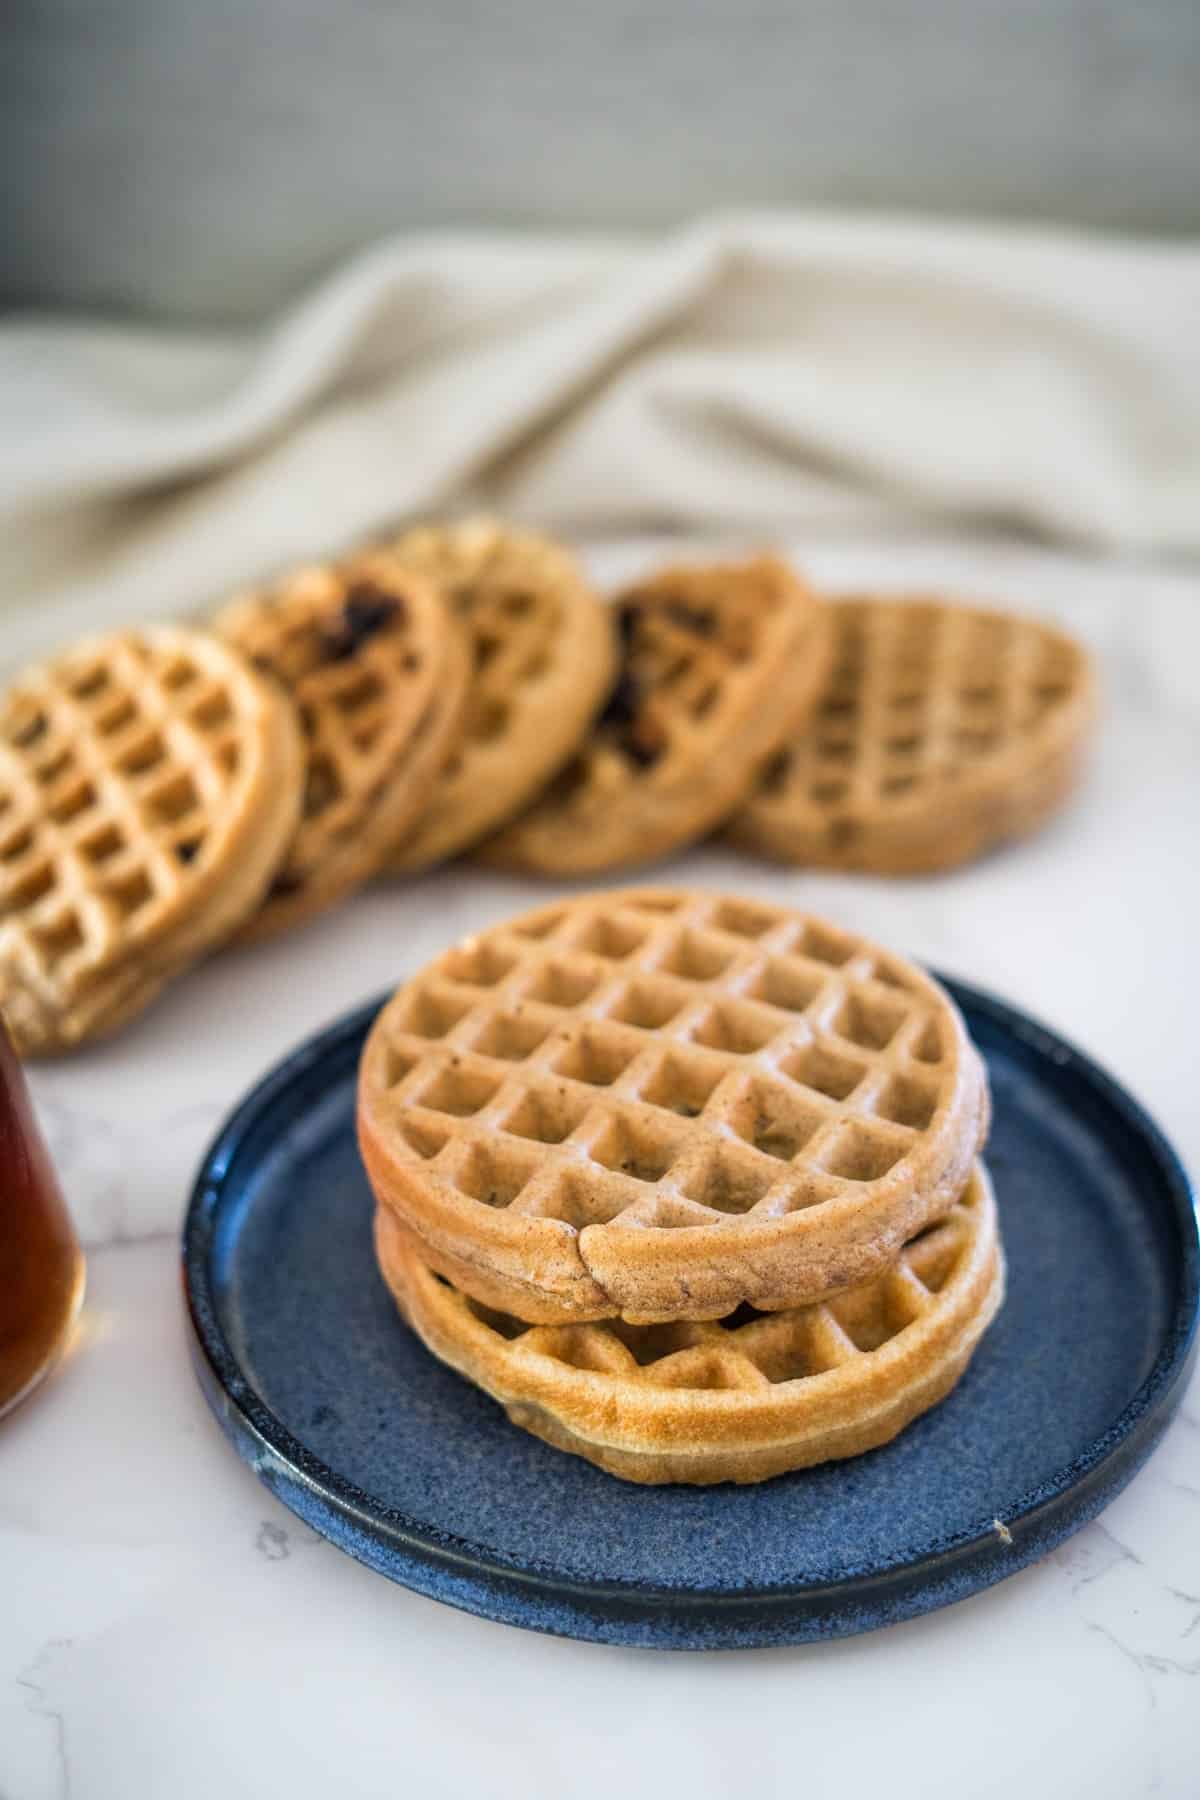 Peanut butter waffles on a plate next to a bottle of honey.